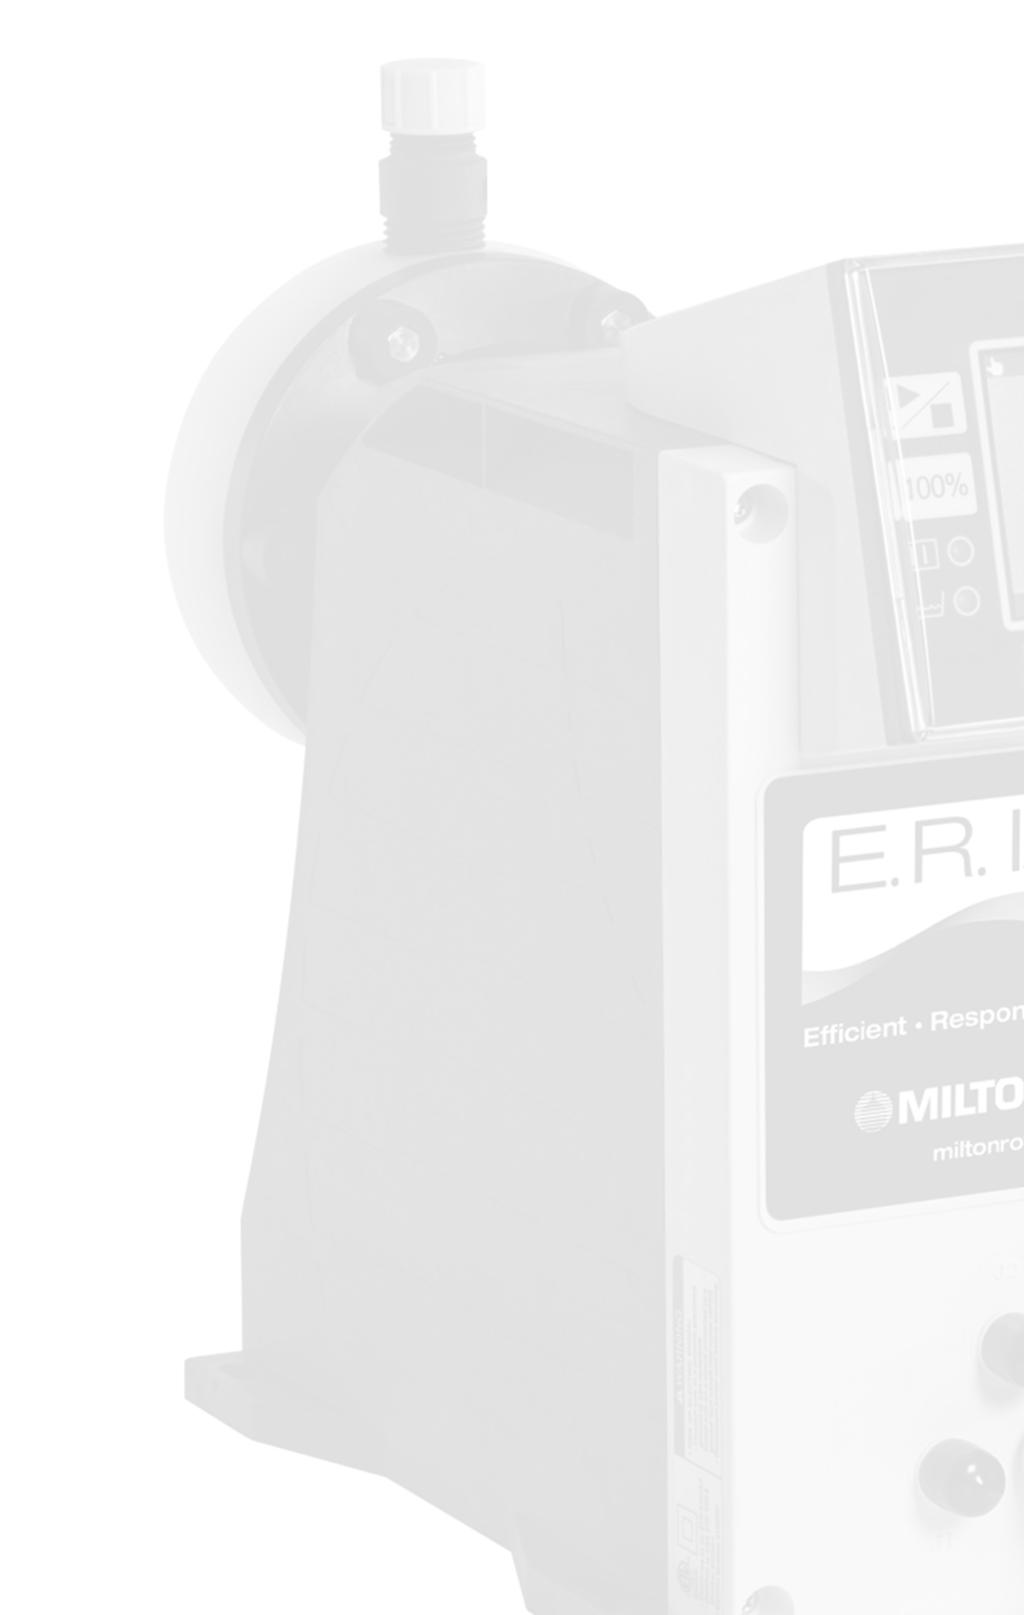 Features and Benefits Milton Roy is setting the standard for accuracy and reliability Milton Roy continues its commitment to innovation and technological advances with the introduction of the E.R.I.